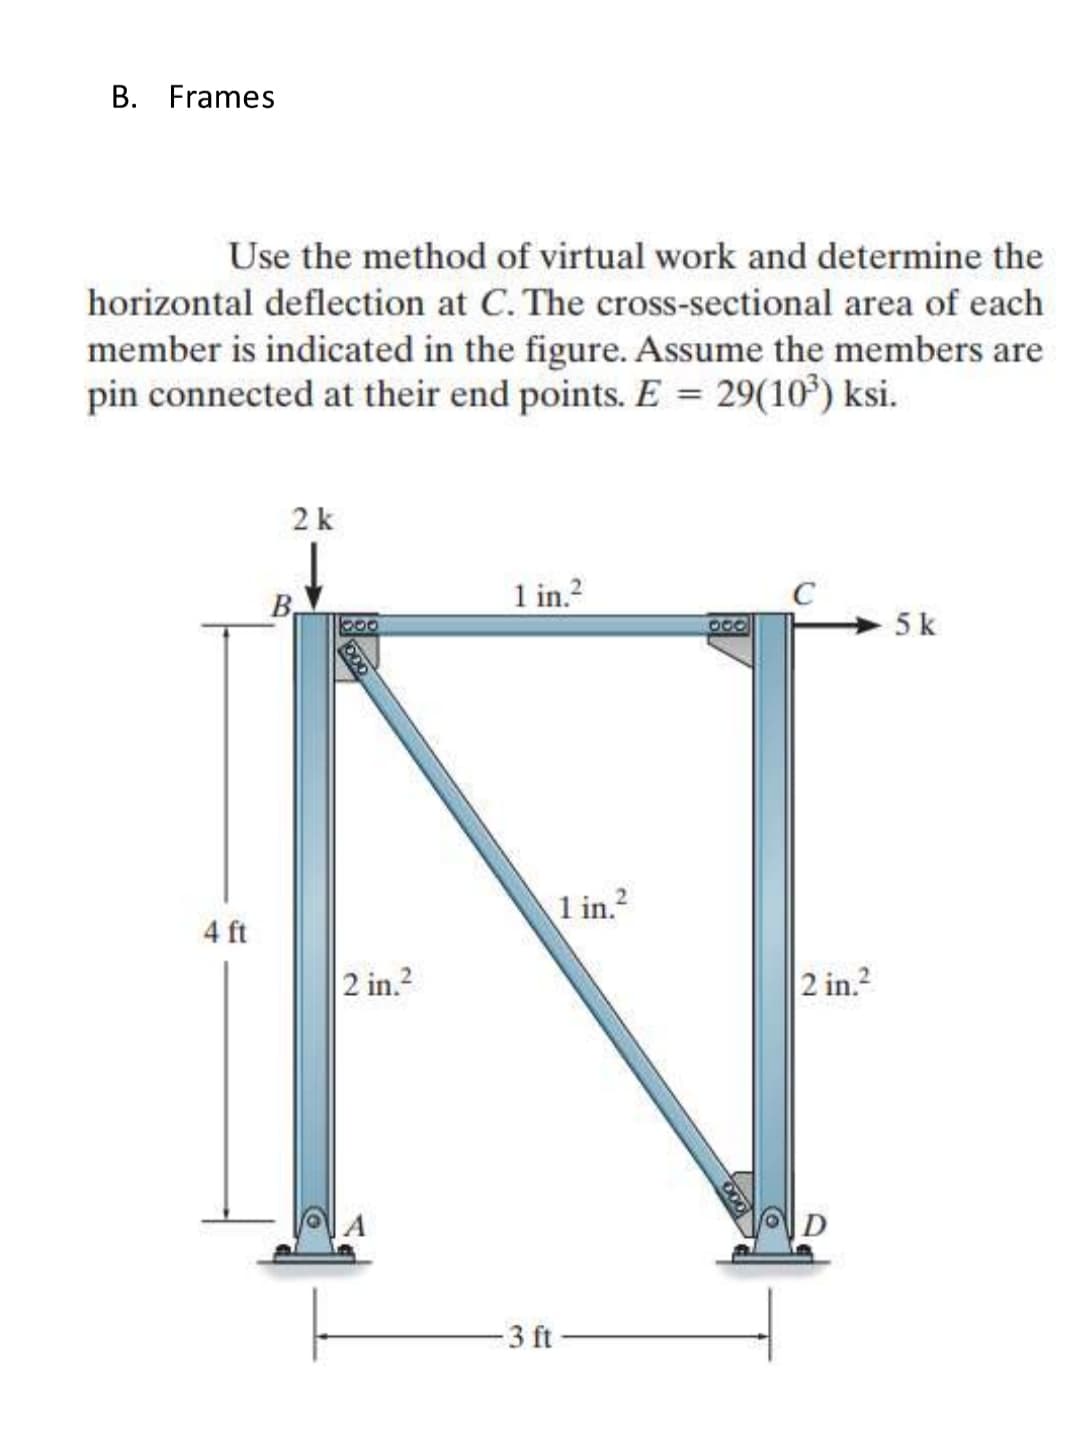 B. Frames
Use the method of virtual work and determine the
horizontal deflection at C. The cross-sectional area of each
member is indicated in the figure. Assume the members are
pin connected at their end points. E = 29(10³) ksi.
4 ft
2 k
B.
boo
2 in.²
1 in.²
-3 ft
1 in.²
C
2 in.²
5 k